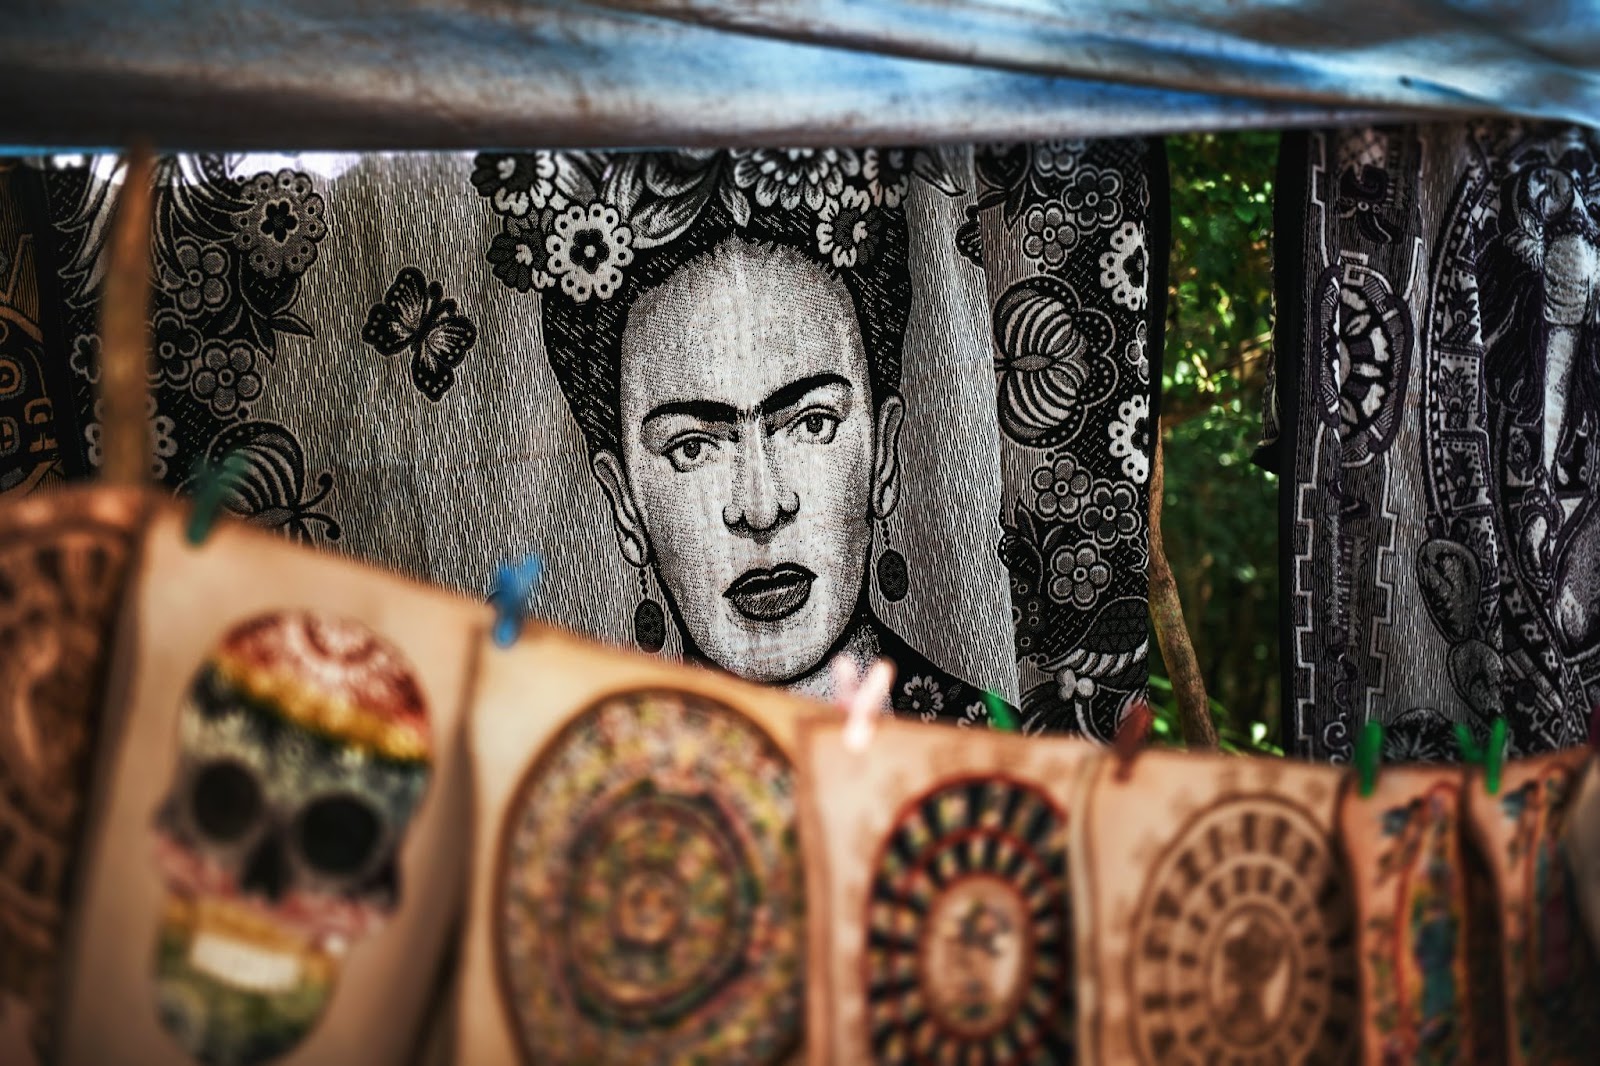 Image of Frida Kahlo’s self portrait used in the textile and sold in the market 